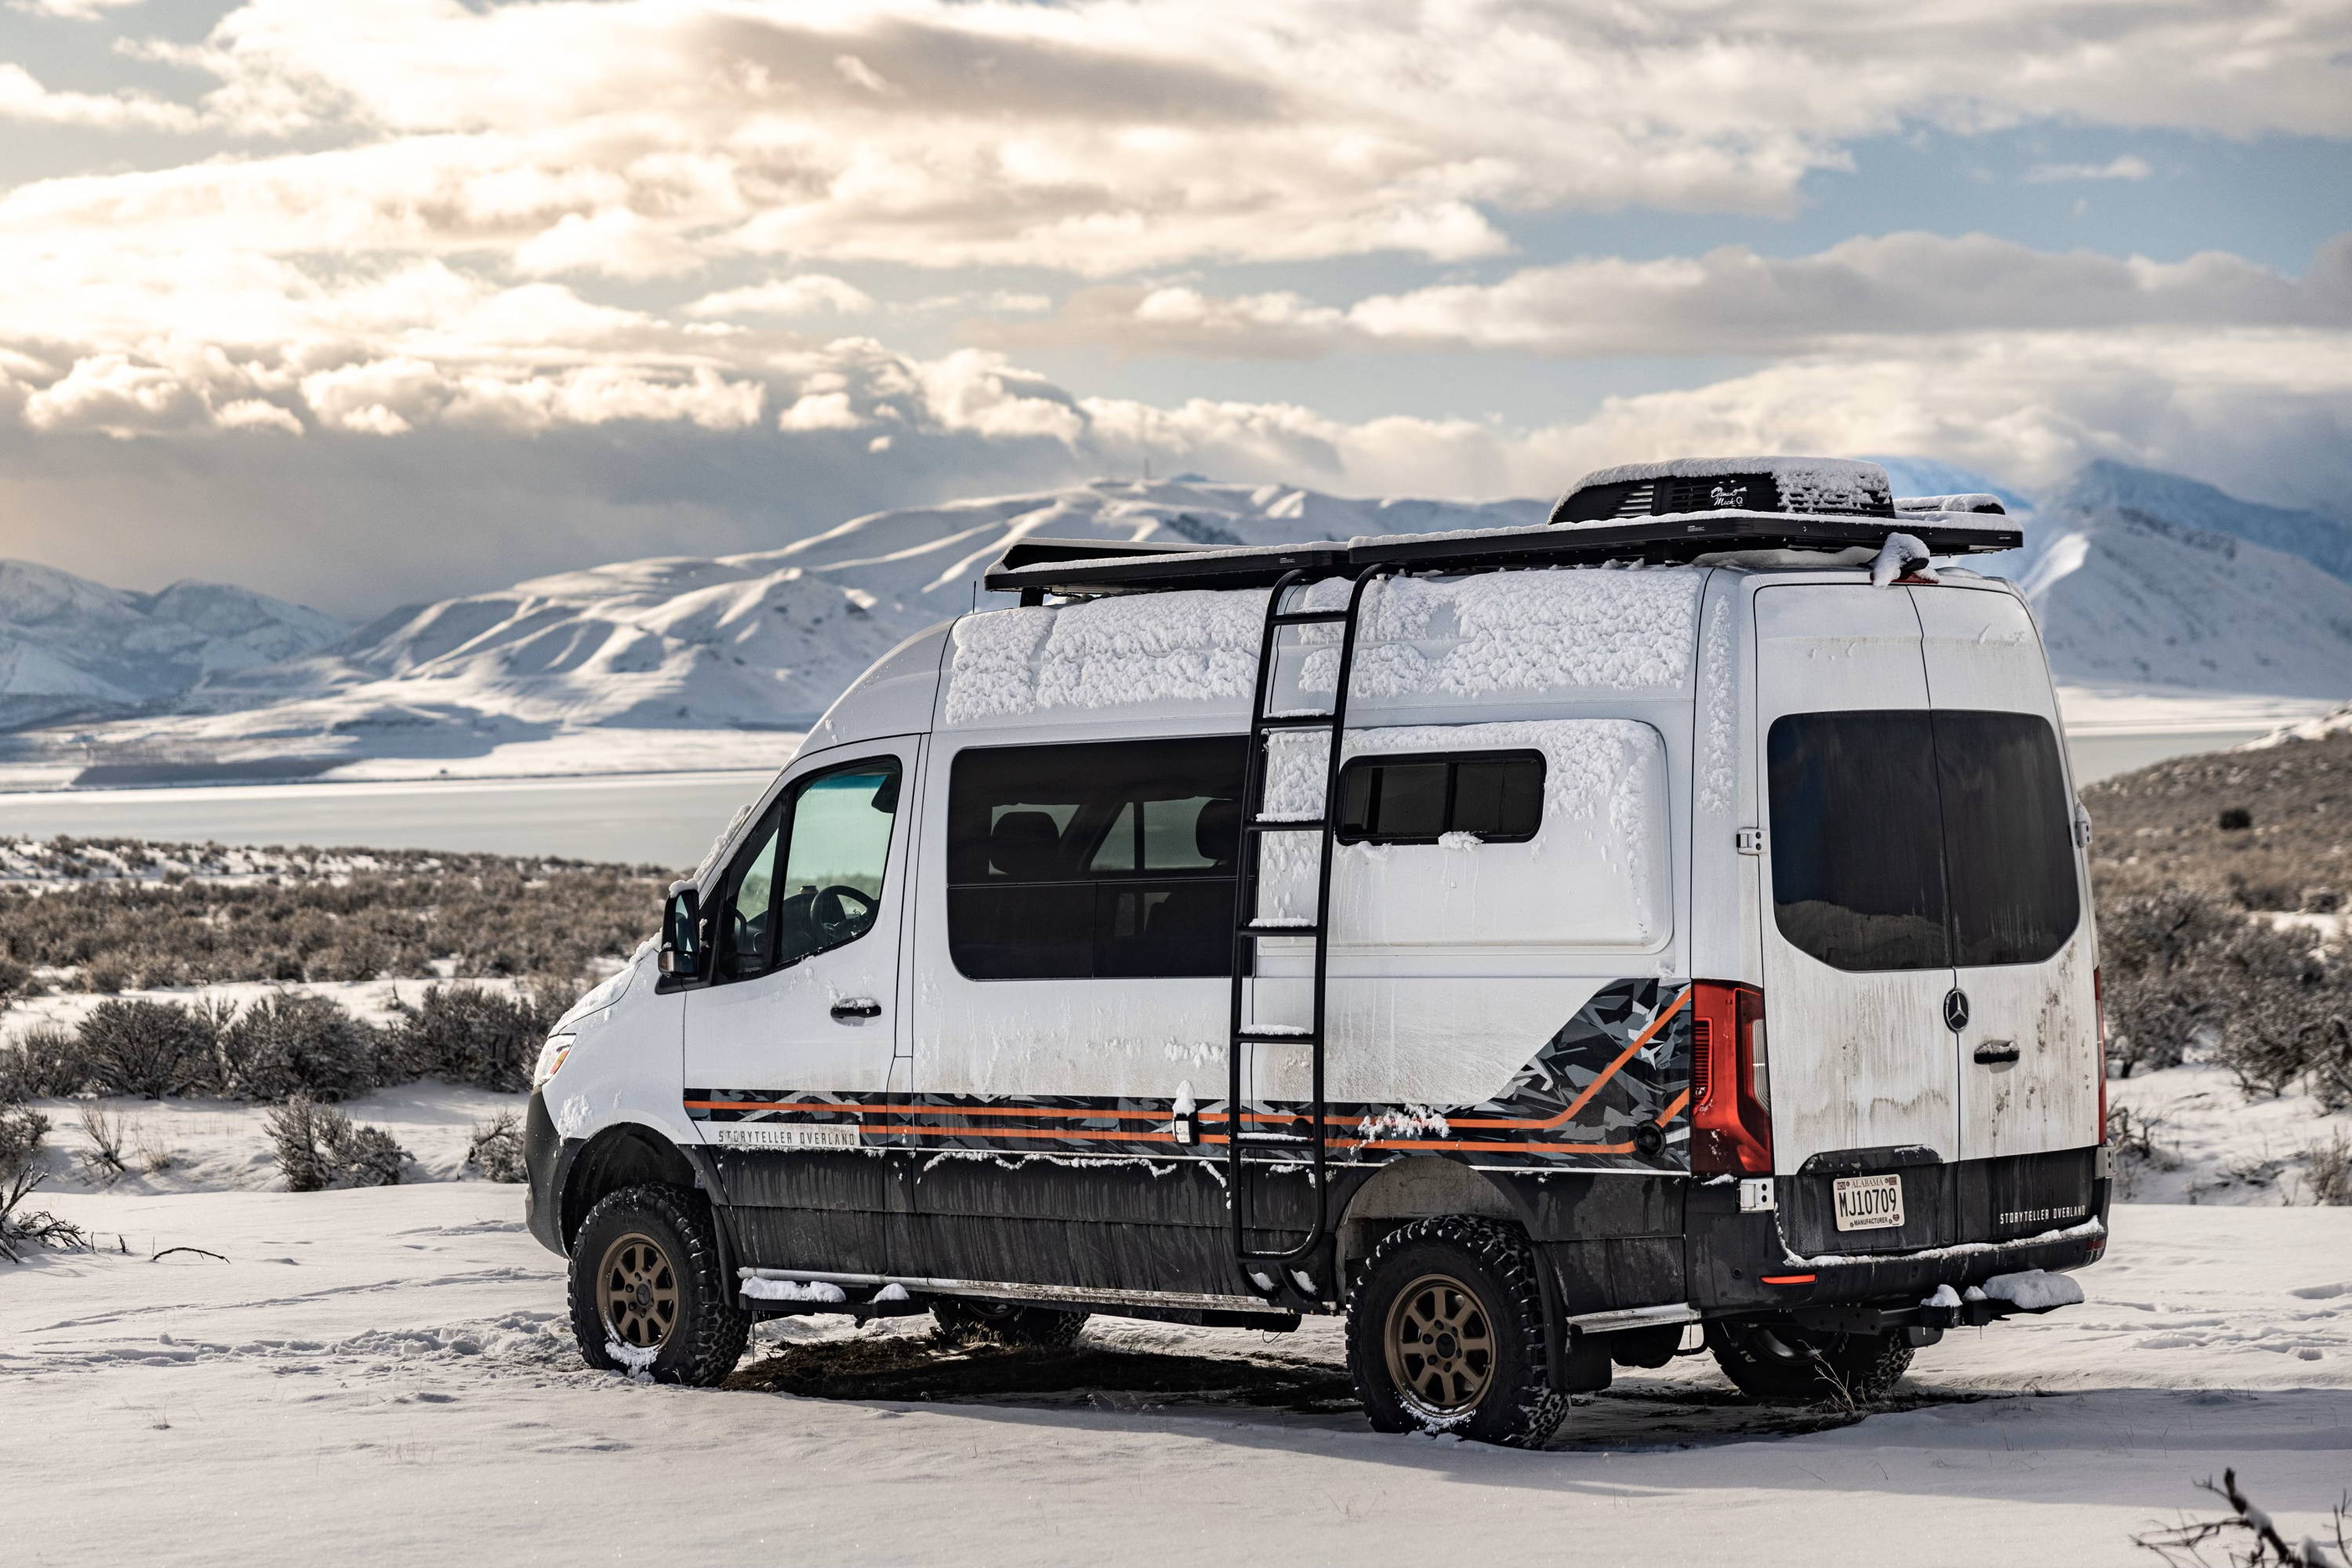 Talon Sei compared Storyteller Overland vs. Winnebago Revel after making the switch to a Storyteller Overland Classic MODE adventure van. His new van, shown above, is a Classic MODE with stripes on the exterior that he customized with Lucid Wraps in Denver, Colorado.